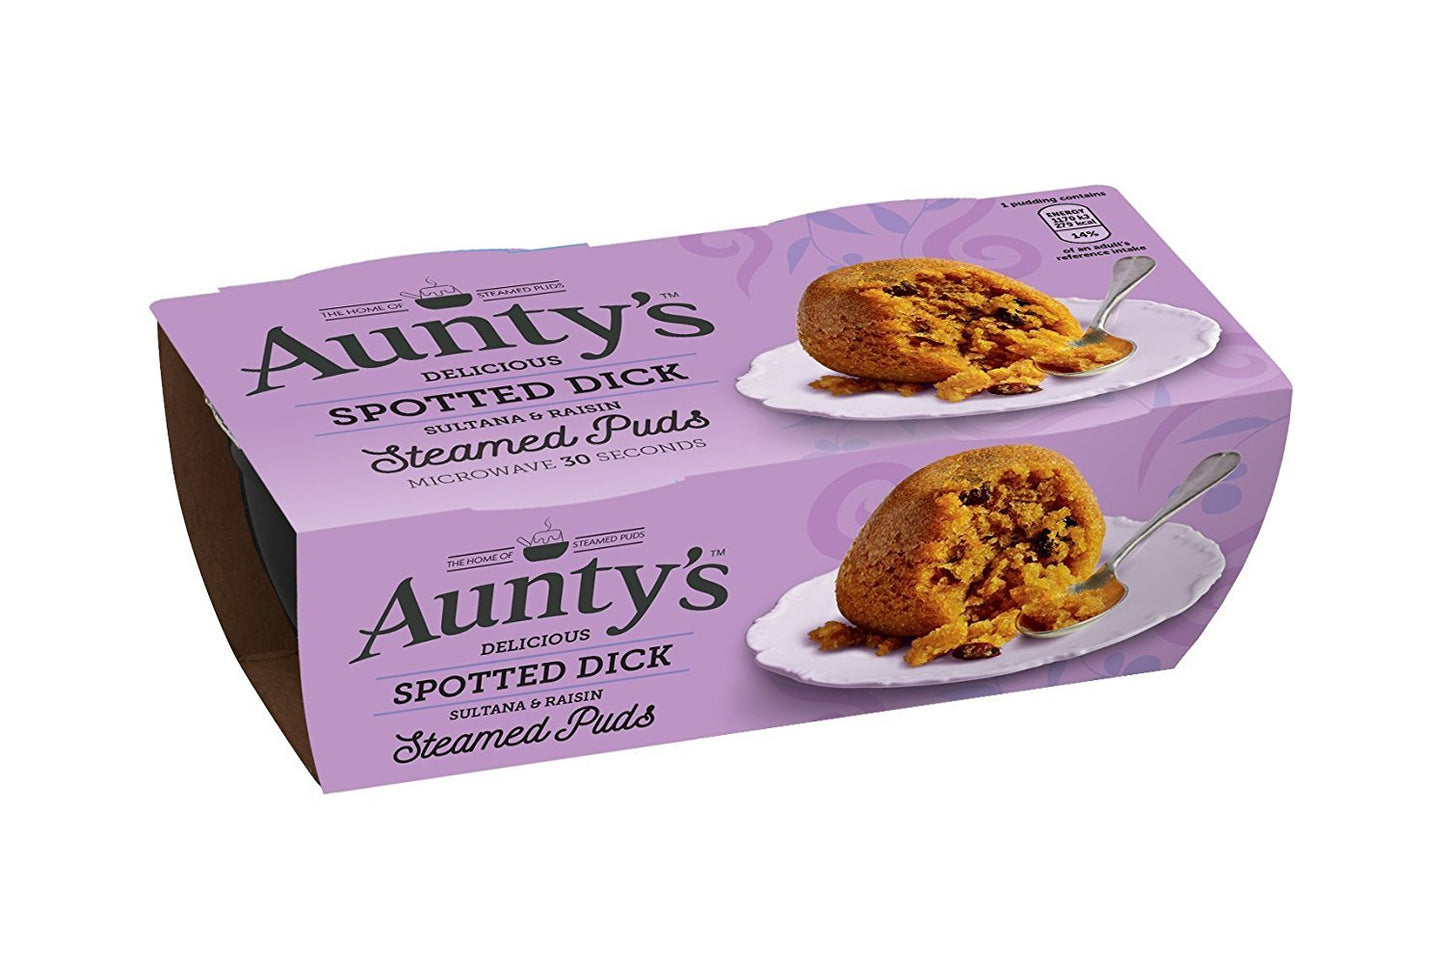 Aunty's: Steamed Puds: Spotted Dick: 2 Pack 200g (7oz)